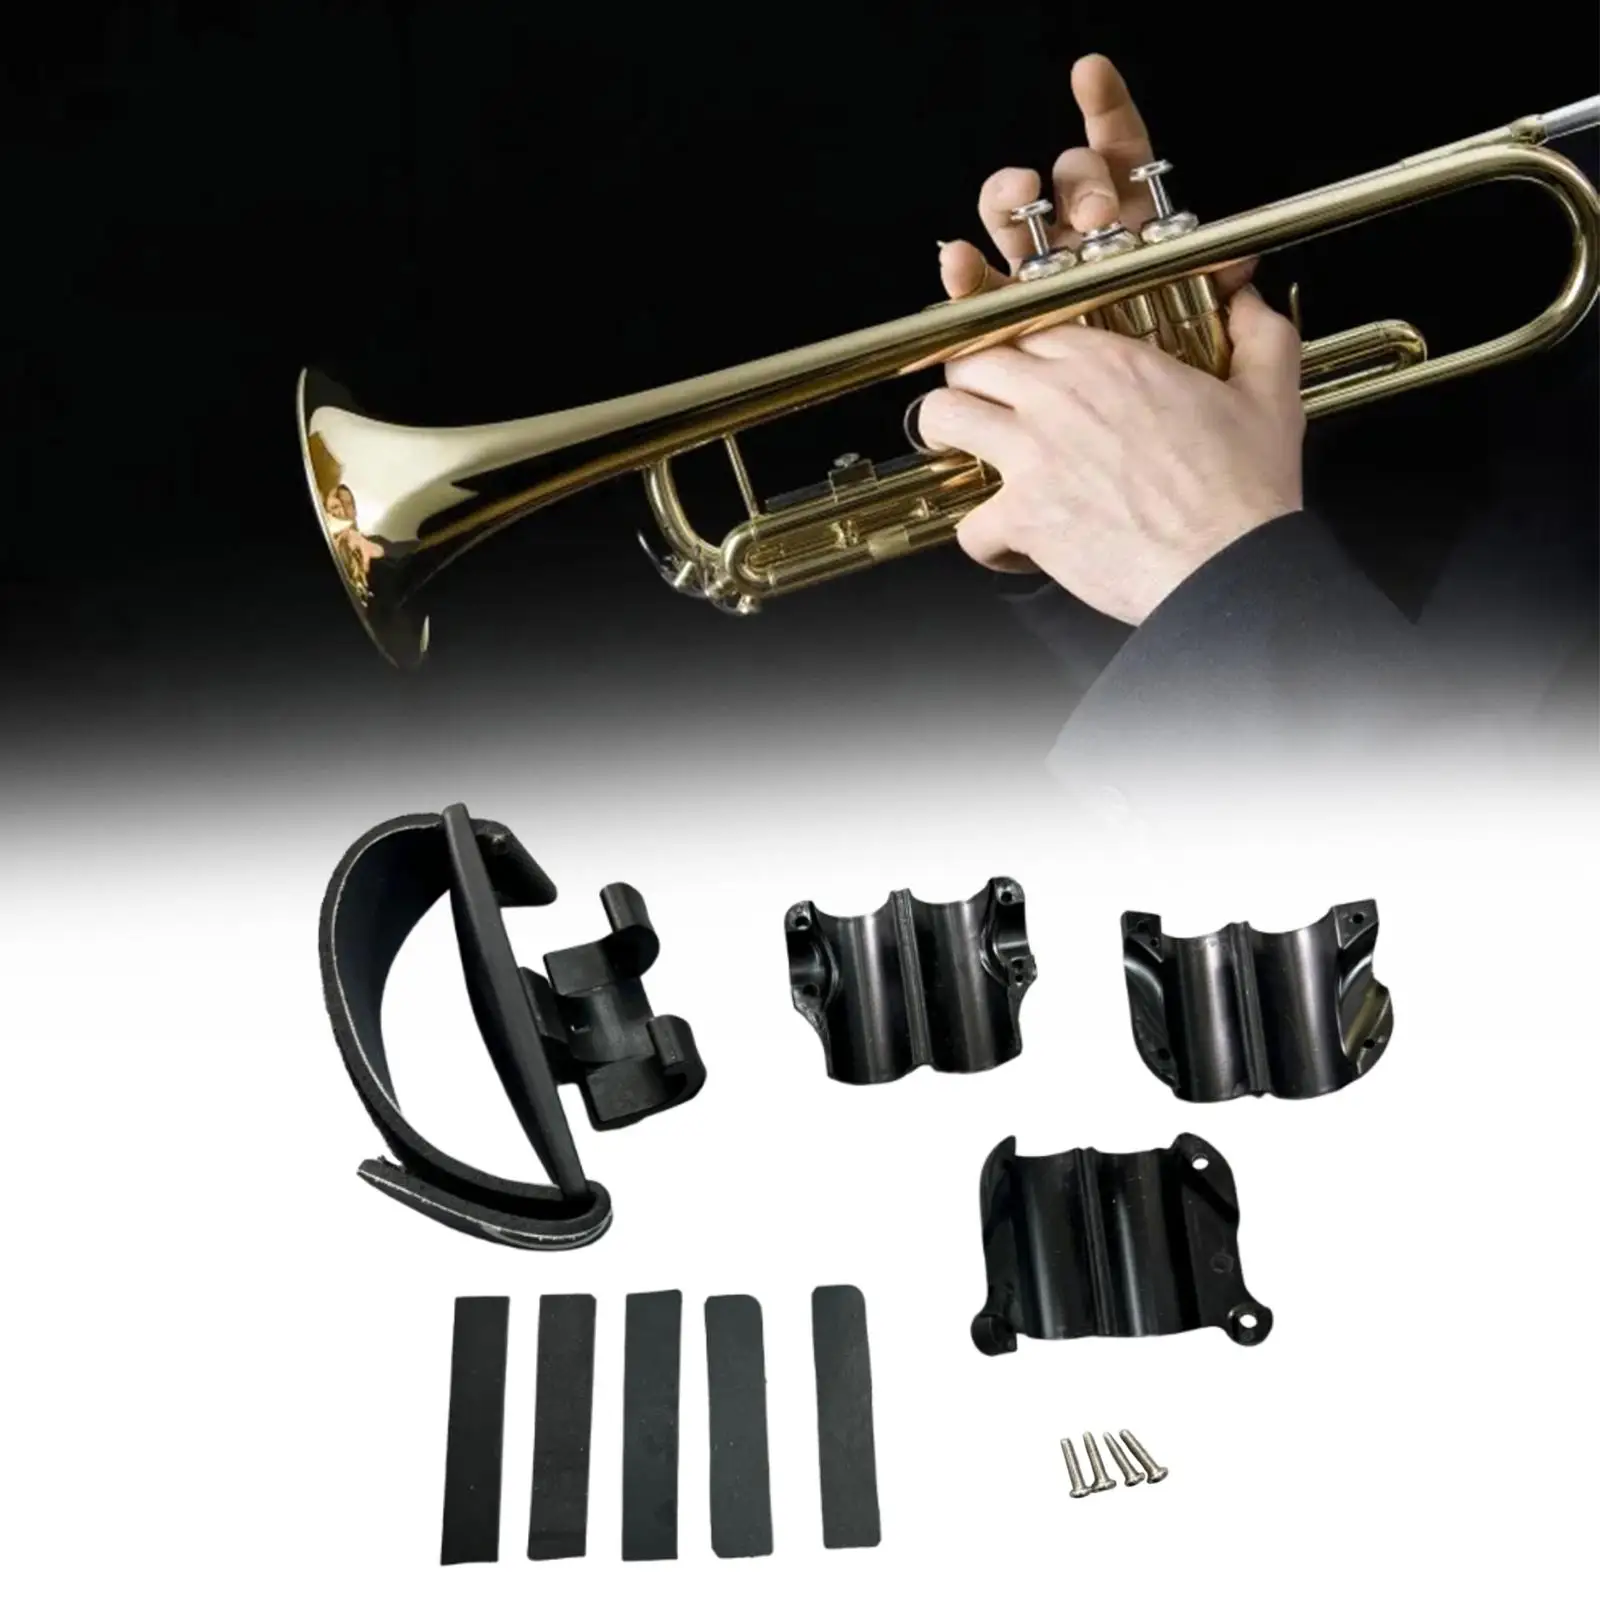 Trombone Grip Can Balance The Instrument Adjustable Protection Musician Gifts with Screws and Straps Cleaning Care Parts